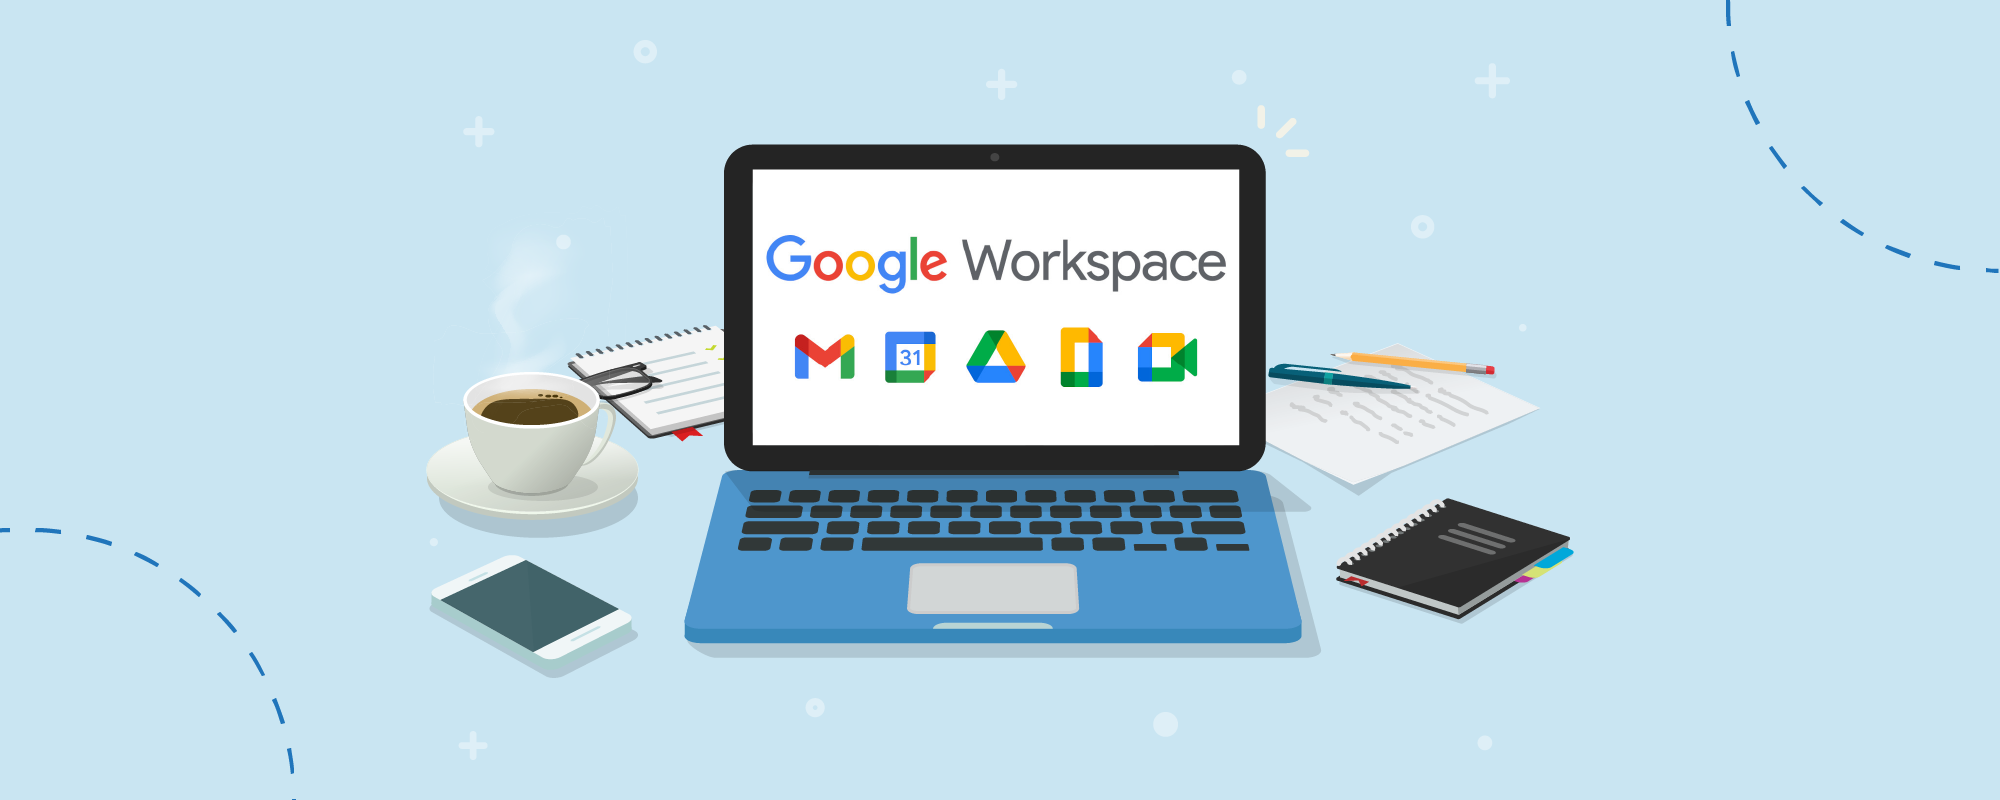 #9134 - Featured image illustrations_Improve Your Business Using Google Workspace